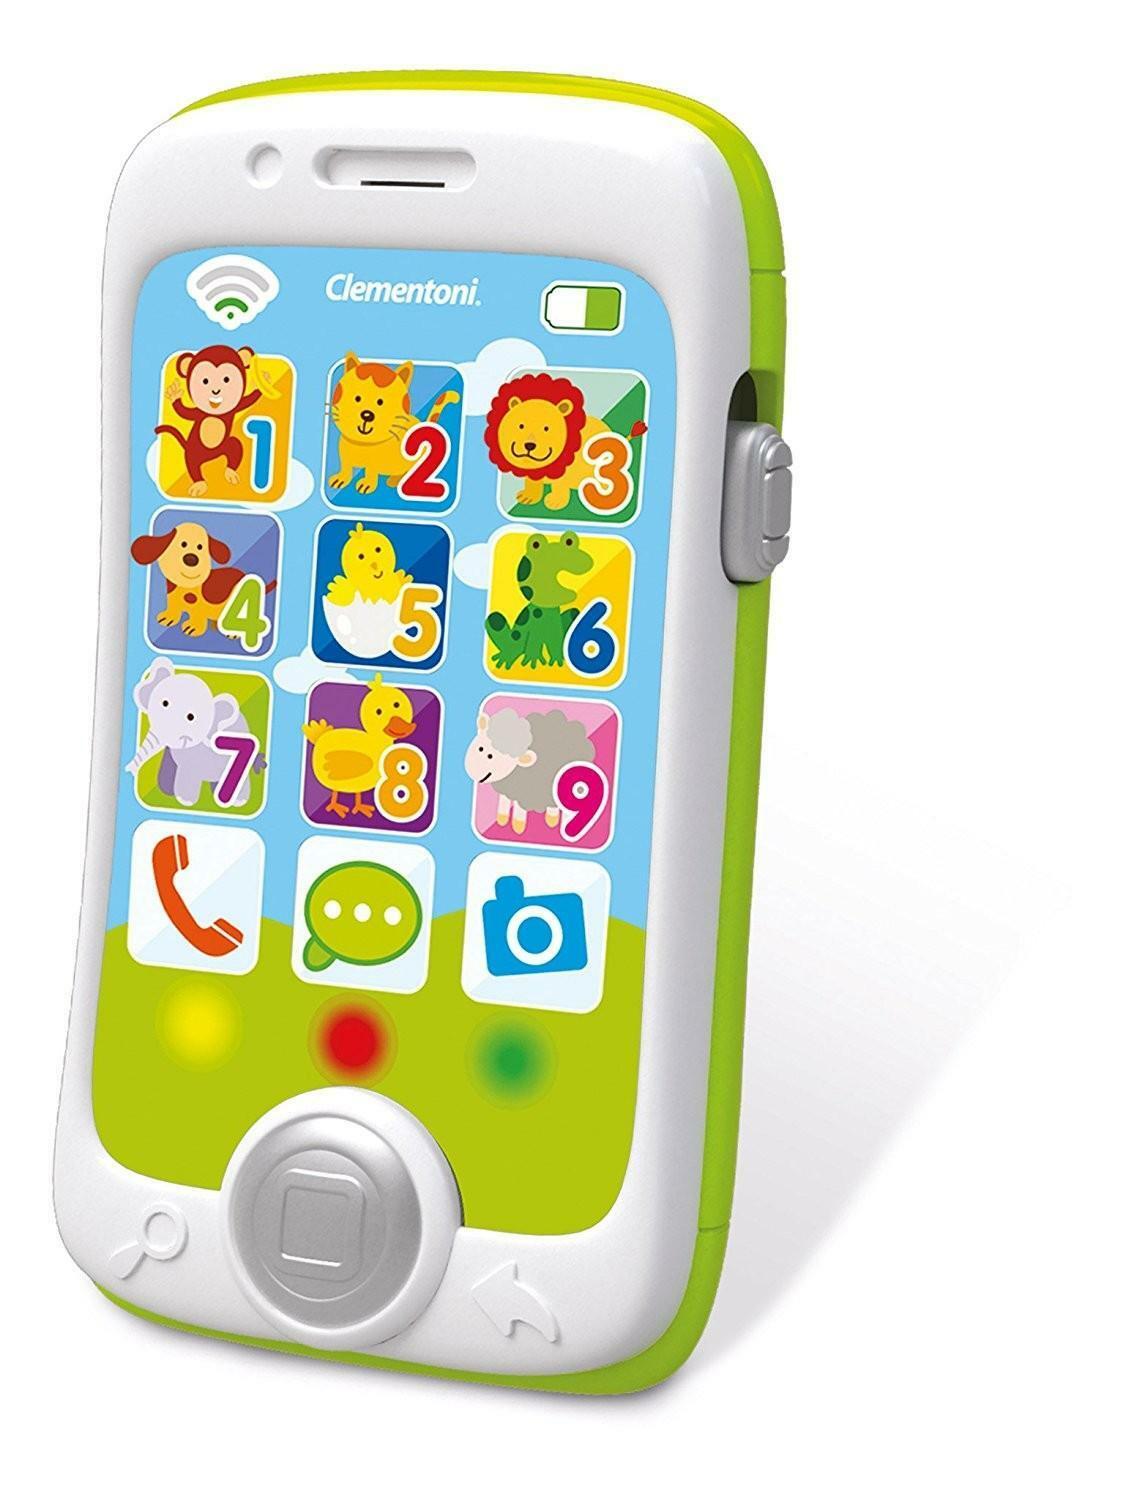 clementoni smartphone touch & play